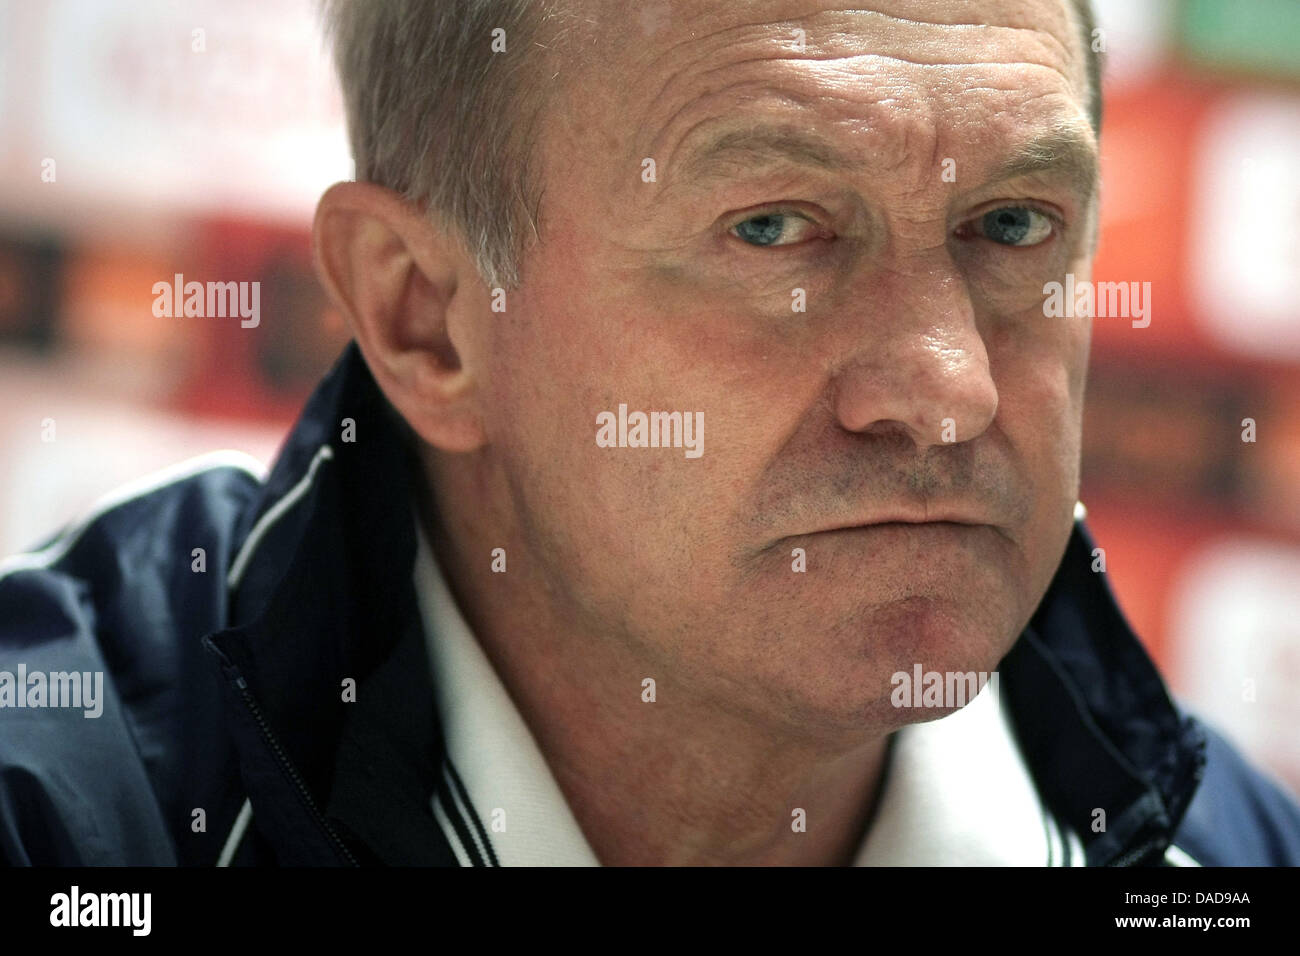 Polands' coach Franciszek Smuda seen at a press conference after the international friendly soccer match between Poland and Belarus at the Brita Arena in Wiesbaden, Germany, 11 October 2011. Photo: Fredrik von Erichsen dpa/lhe Stock Photo